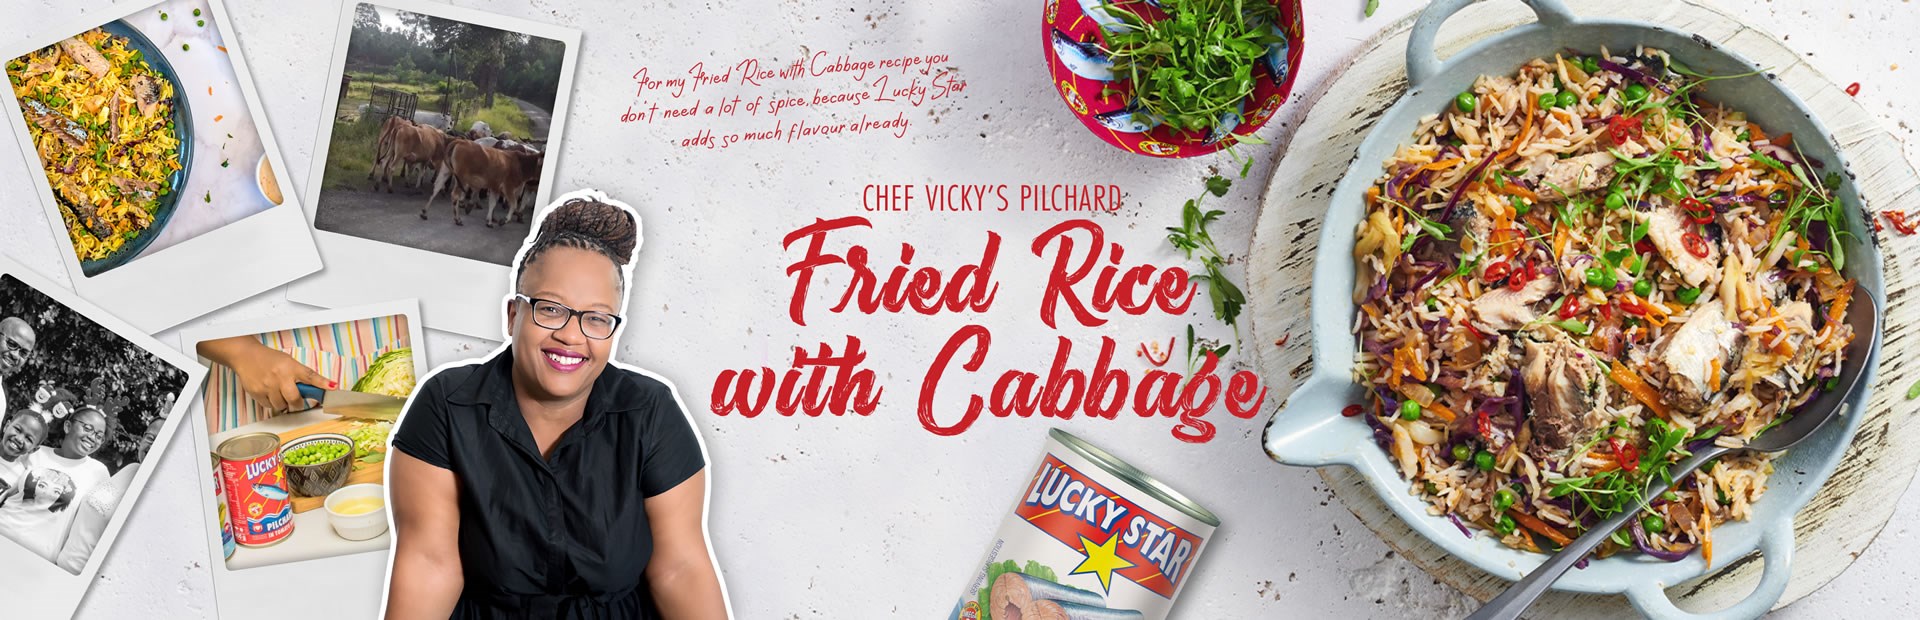 CHEF VICKY’S PILCHARD Fried Rice with Cabbage